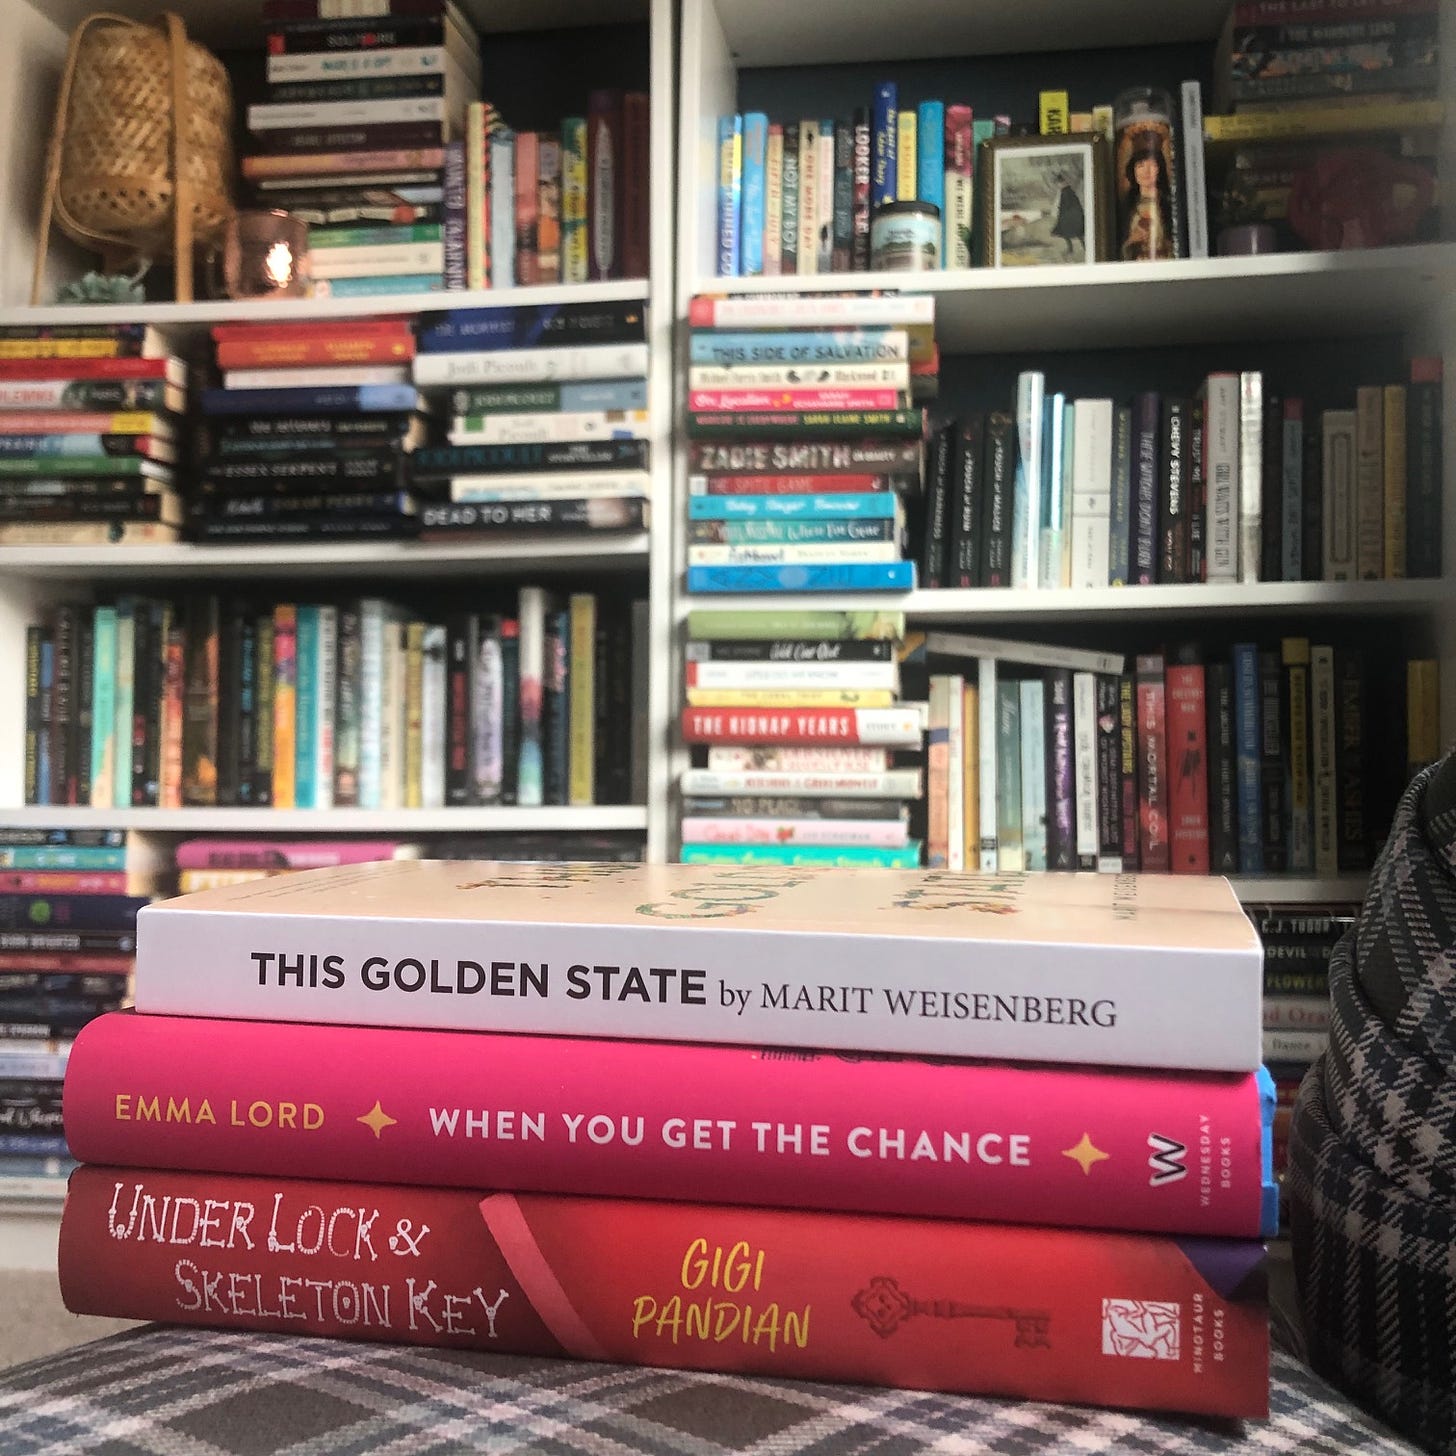 Books pictured: This Golden State by Marit Weisenberg, Under Lock & Skeleton Key by Gigi Pandian, and When You Get the Chance by Emma Lord. 